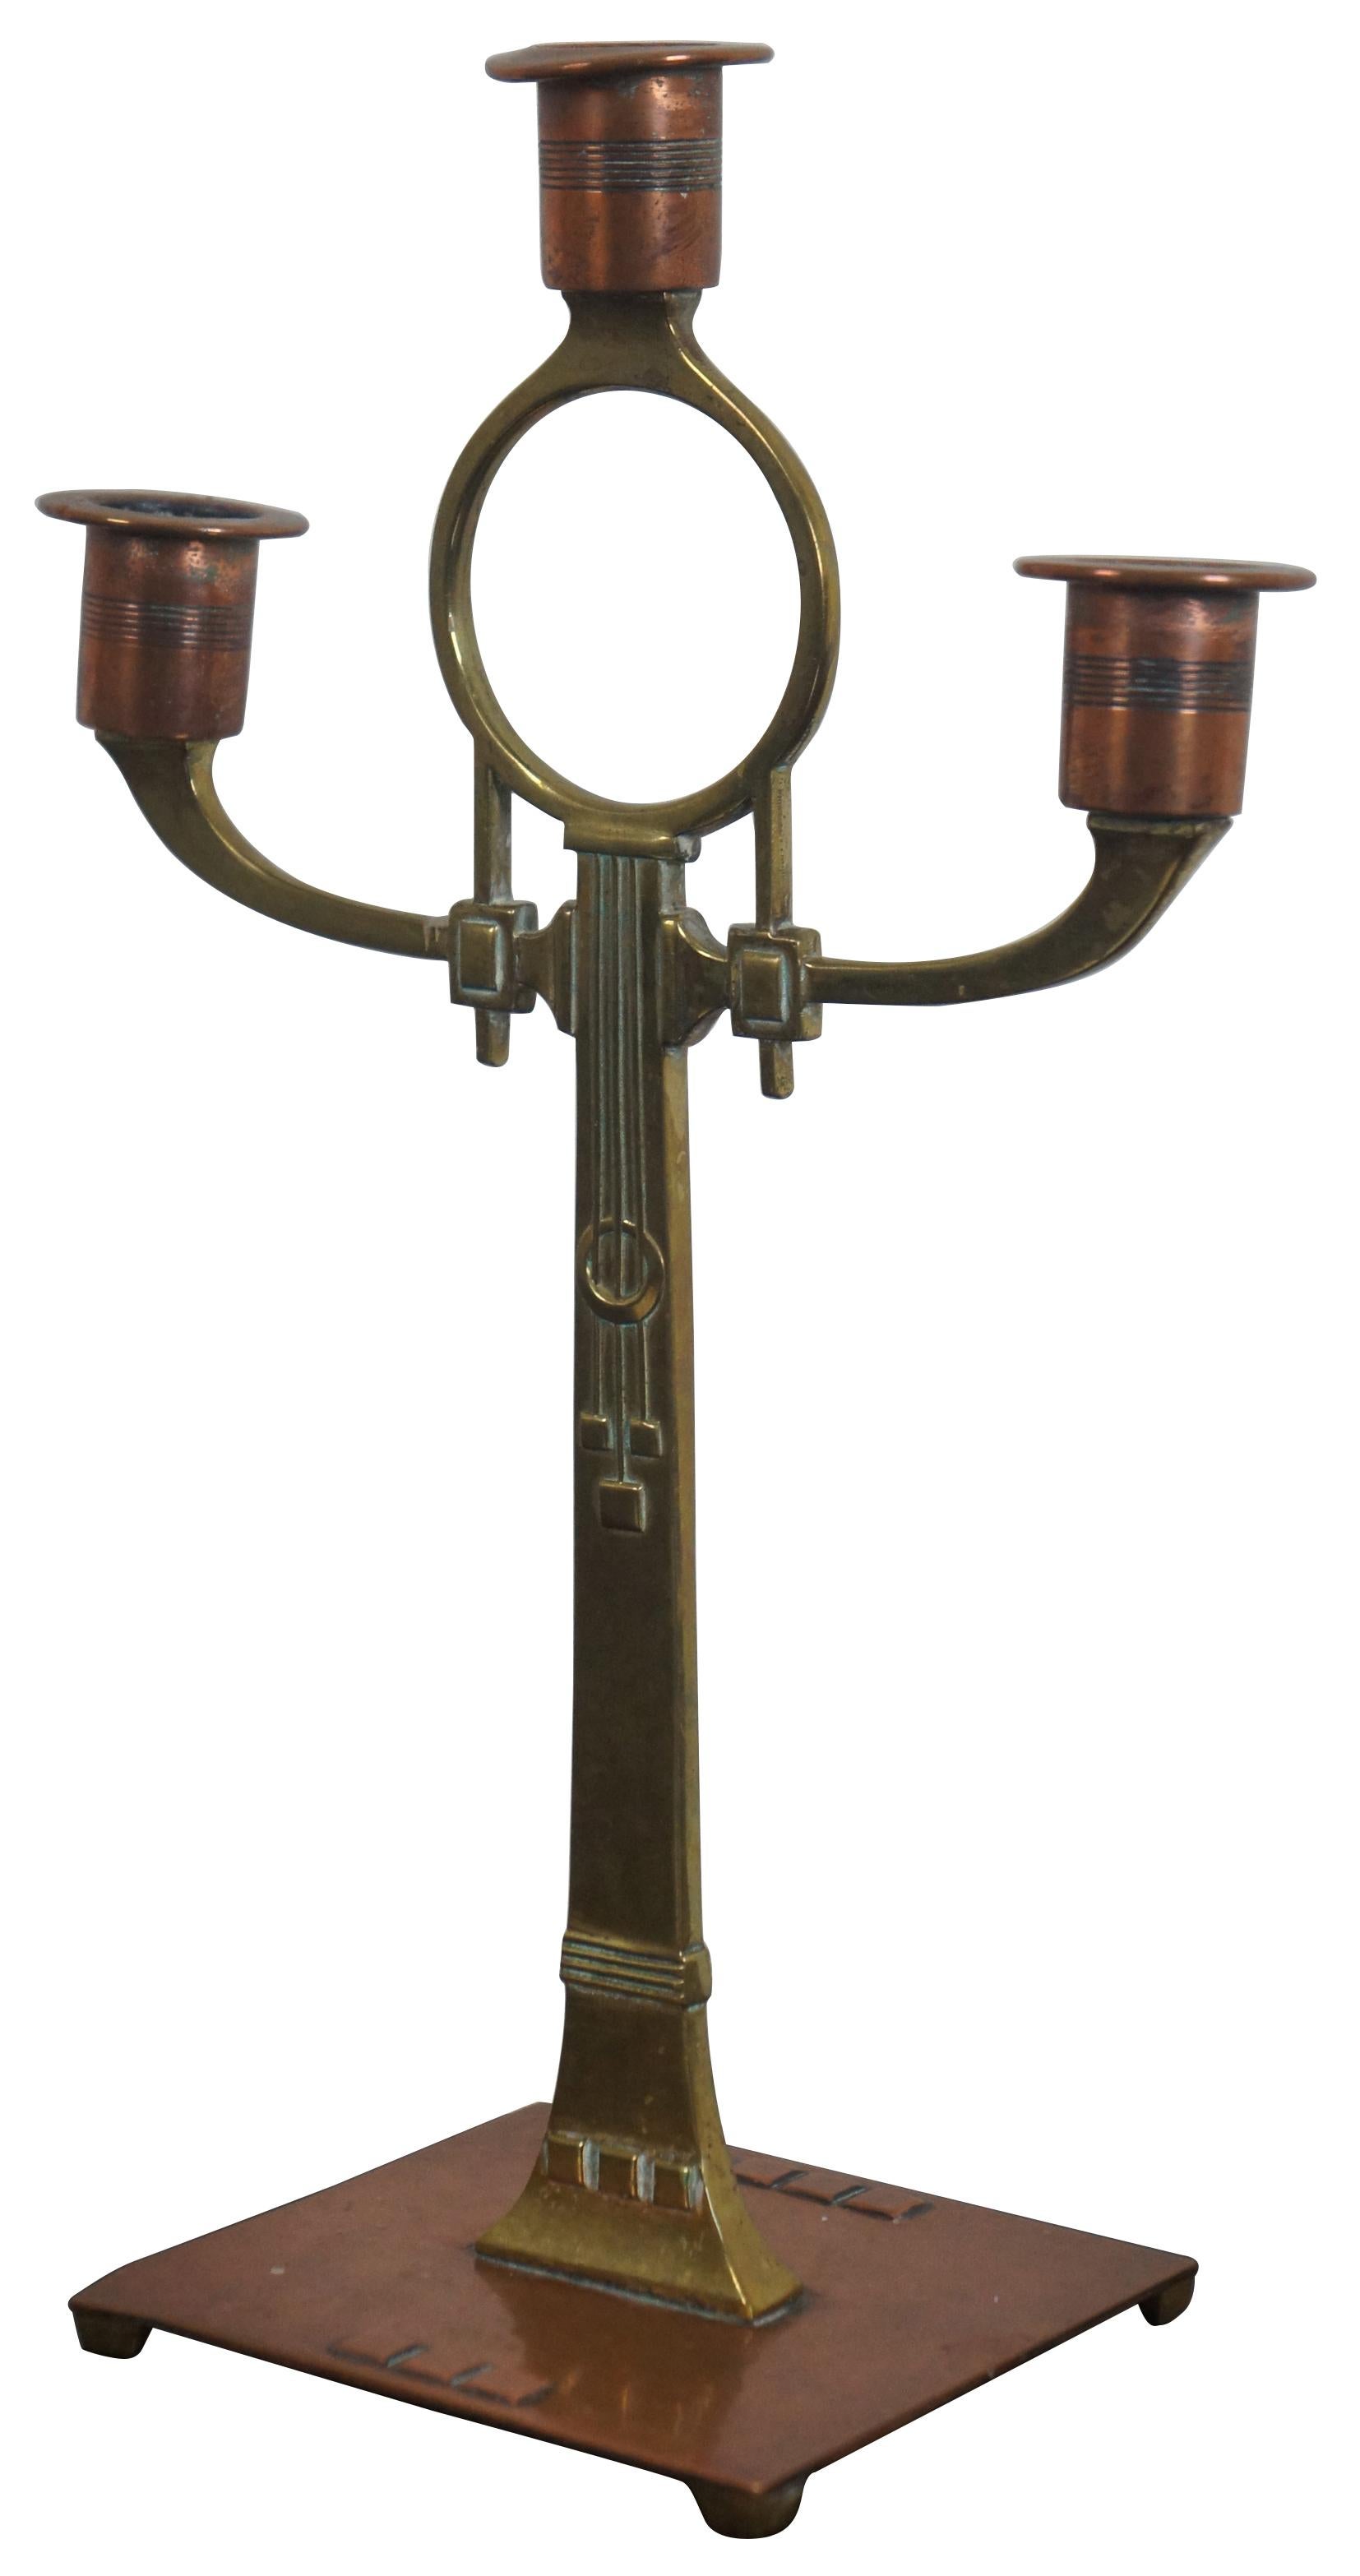 WMF Jugendstil style copper and brass candlestick with Osterich mark. A very stylish secessionist design from the Aesthetic period in Germany. Made by Wurttembergische Metallwarenfabrik circa 1880s-1920s.